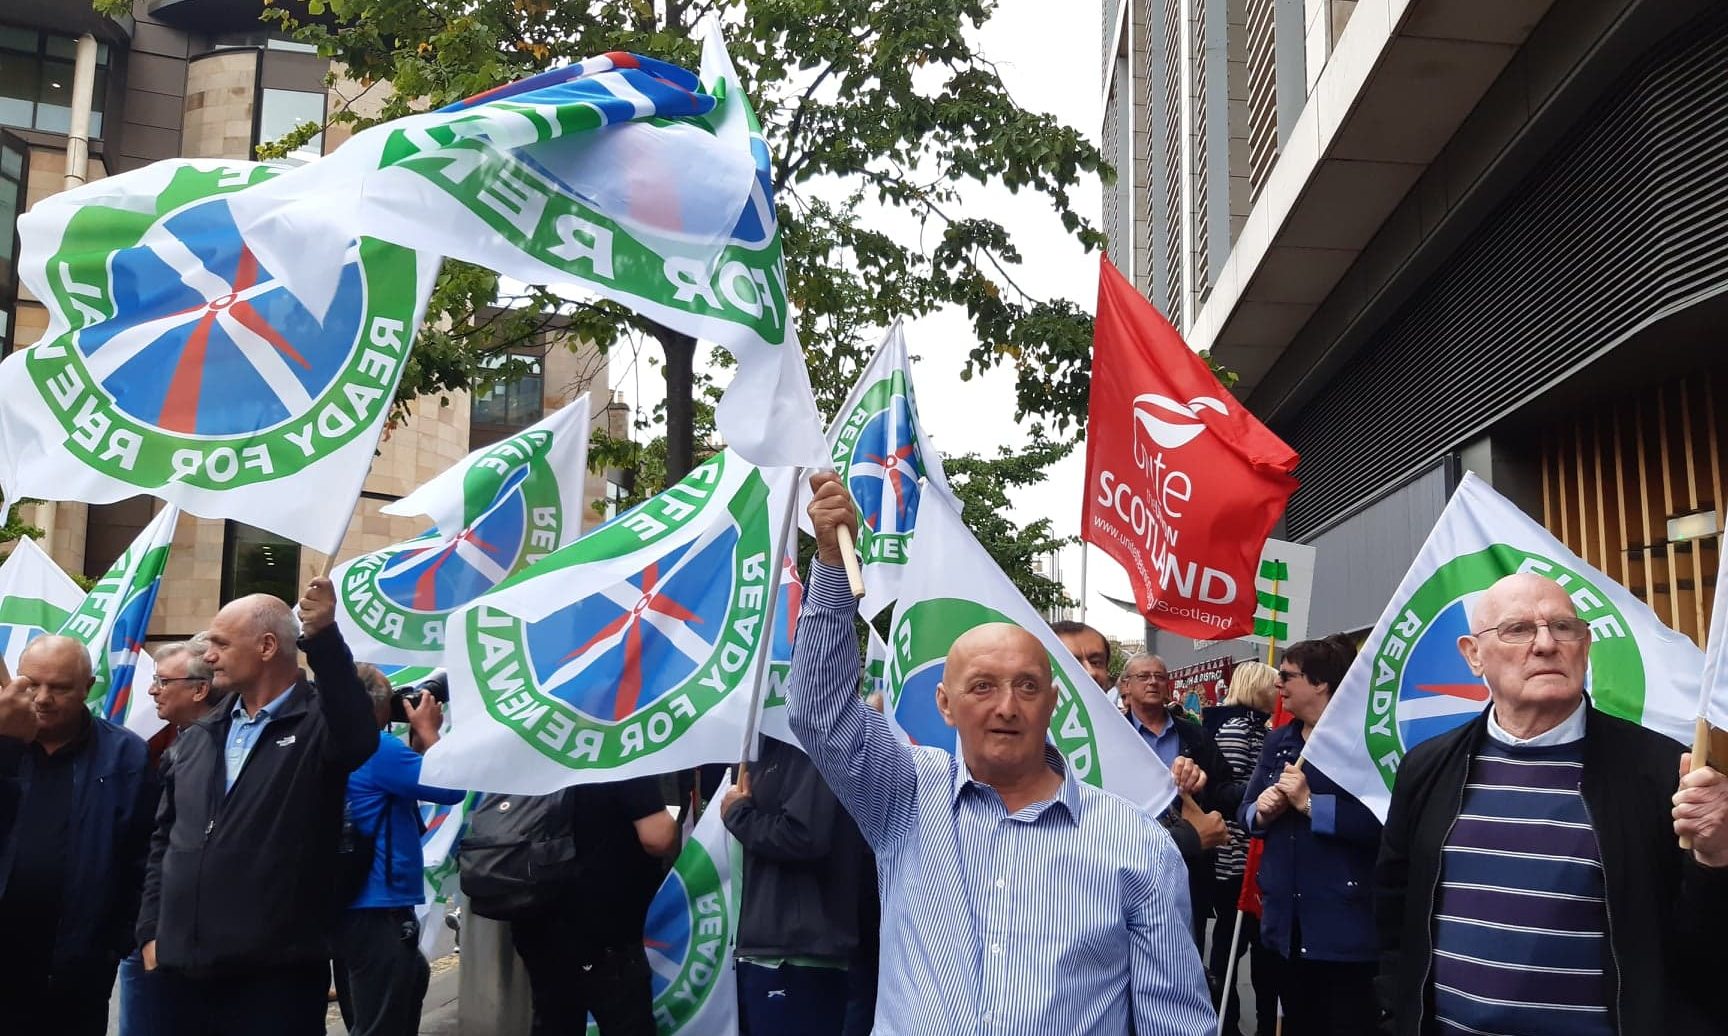 Protesters at EDF offices in Edinburgh